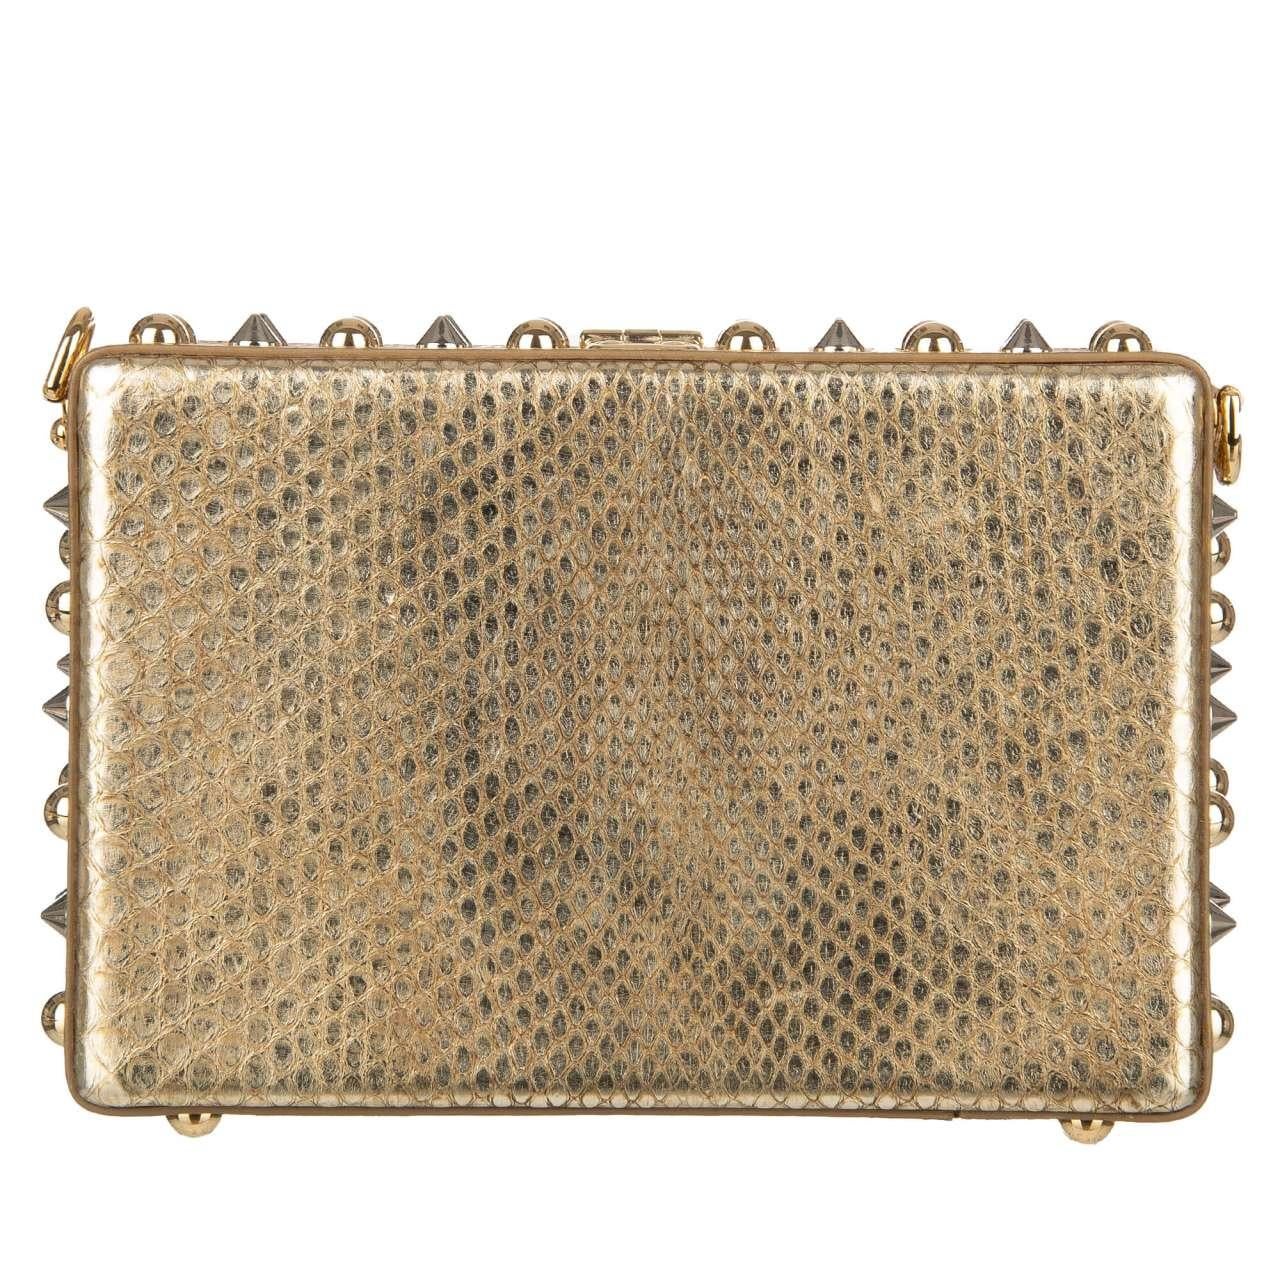 Women's Dolce & Gabbana Unique Jeweled Studded Snakeskin Clutch Bag DOLCE BOX Gold For Sale